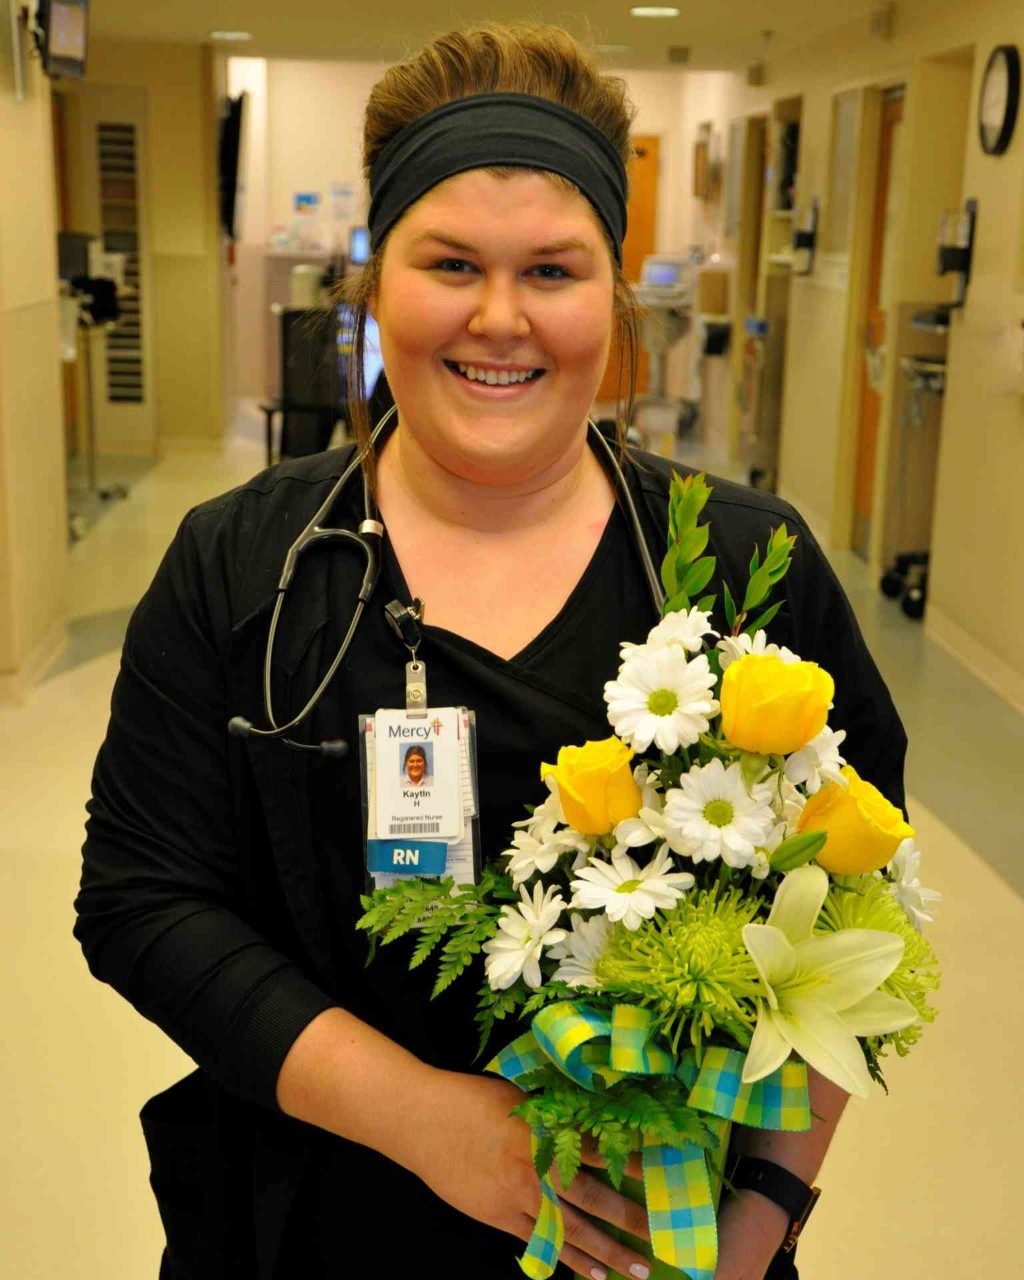 Kaytln Harpole, RN, emergency department, earning a DAISY Award for the extraordinary, compassionate and skillful nursing care she provides at Mercy Hospital South.